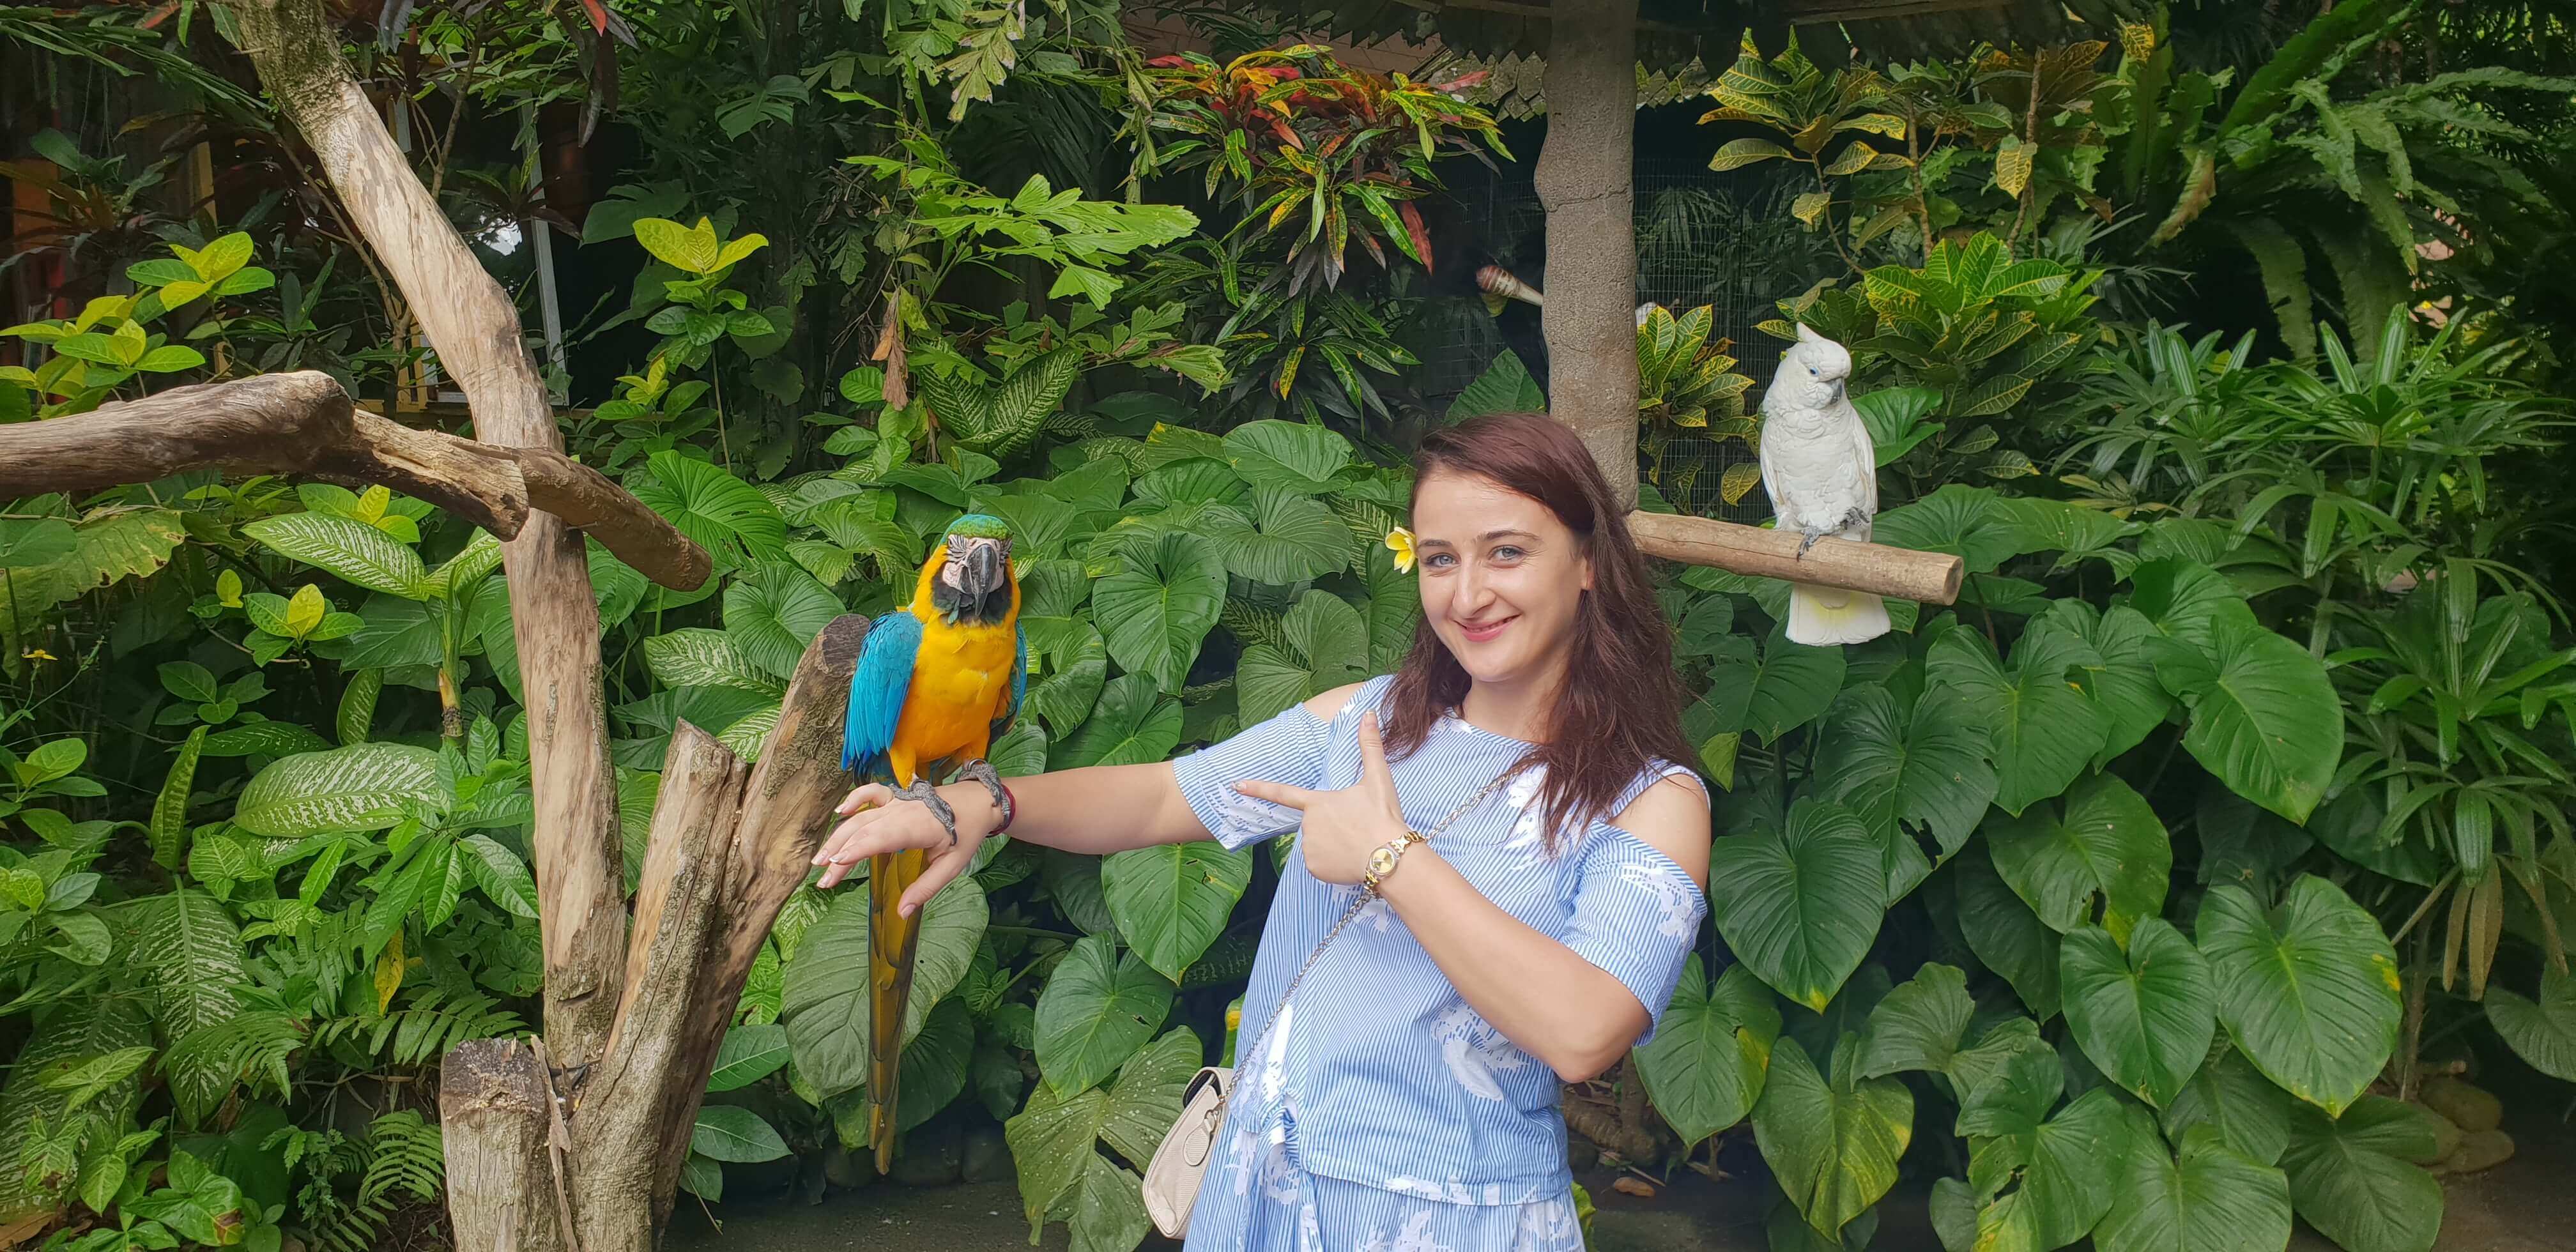 You get to click free pictures with colourful parrots inside the museum premises